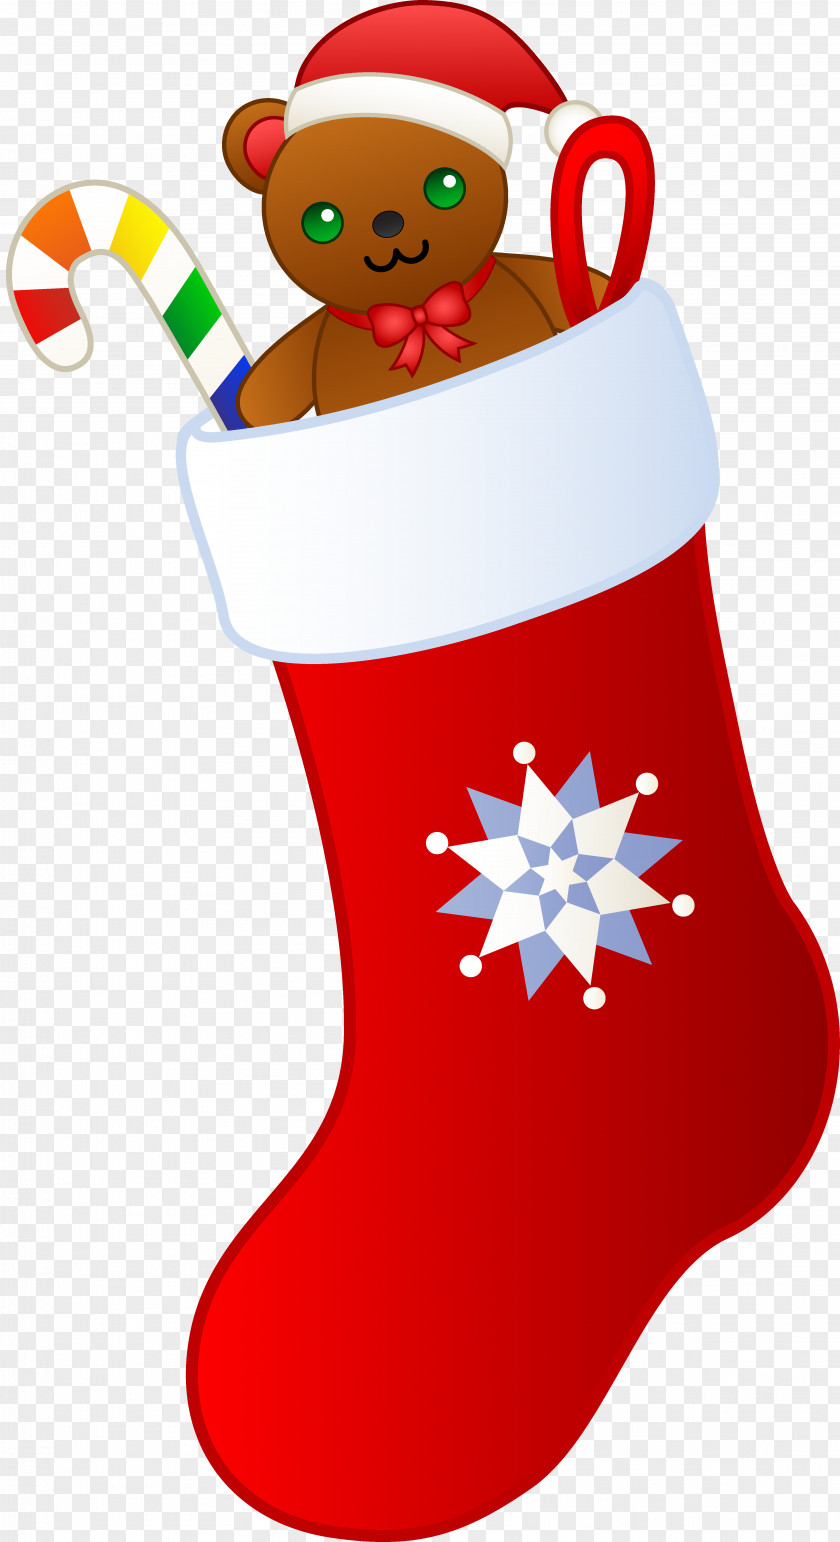 Stocking Sock Cliparts Candy Cane Christmas Stockings Clip Art PNG